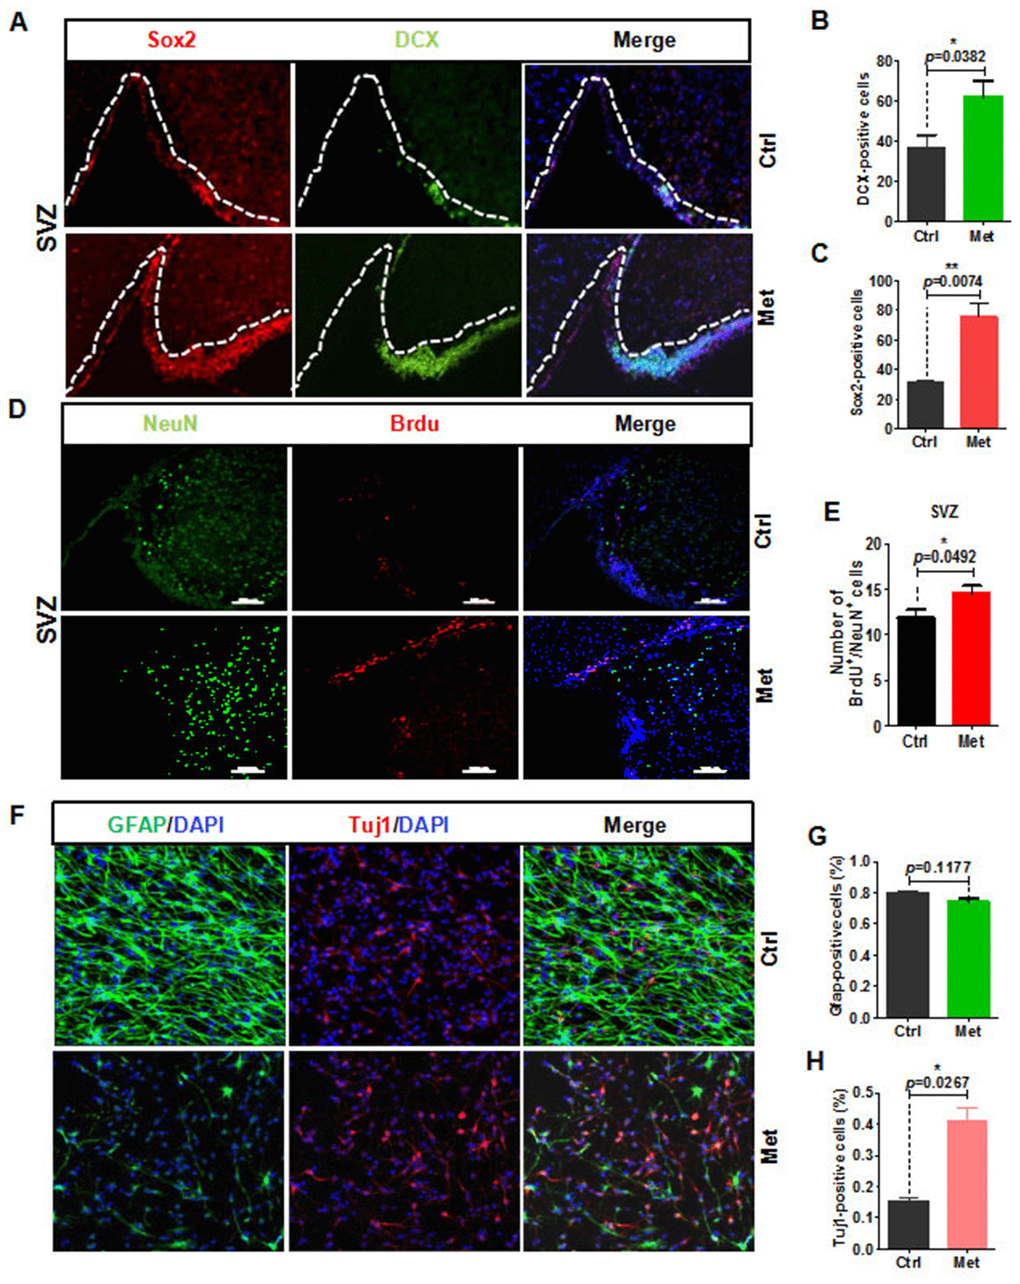 Metformin rejuvenation of neurogenic potential in aged mice. (A) The subventricular zone (SVZ) of old mice treated with metformin (n ≥ 3) immunostained with the neural stem cell marker, Sox2, and newborn neuronal marker, DCX. Right: Quantification of (B) Sox2+ cells and (C) DCX+ cells. (D) SVZ of old mice immunostained with the neuronal cell marker, NeuN, and cell proliferation marker, BrdU. Right: Quantification of (E) BrdU+ /NeuN+ cells to quantify newborn neurons. (F) Representative fields of GFAP and Tuj1 immunofluorescence staining of cultured neural stem cells treated with metformin after 7 days of spontaneous differentiation. Right: Statistical analysis of percentages of (G) GFAP+ cells and (H) Tuj1+ cells. Scale bar = 100 μm. Ctrl: Control; Met: Metformin. The overall significance between two groups was determined by Student’s t-test. * p p p 